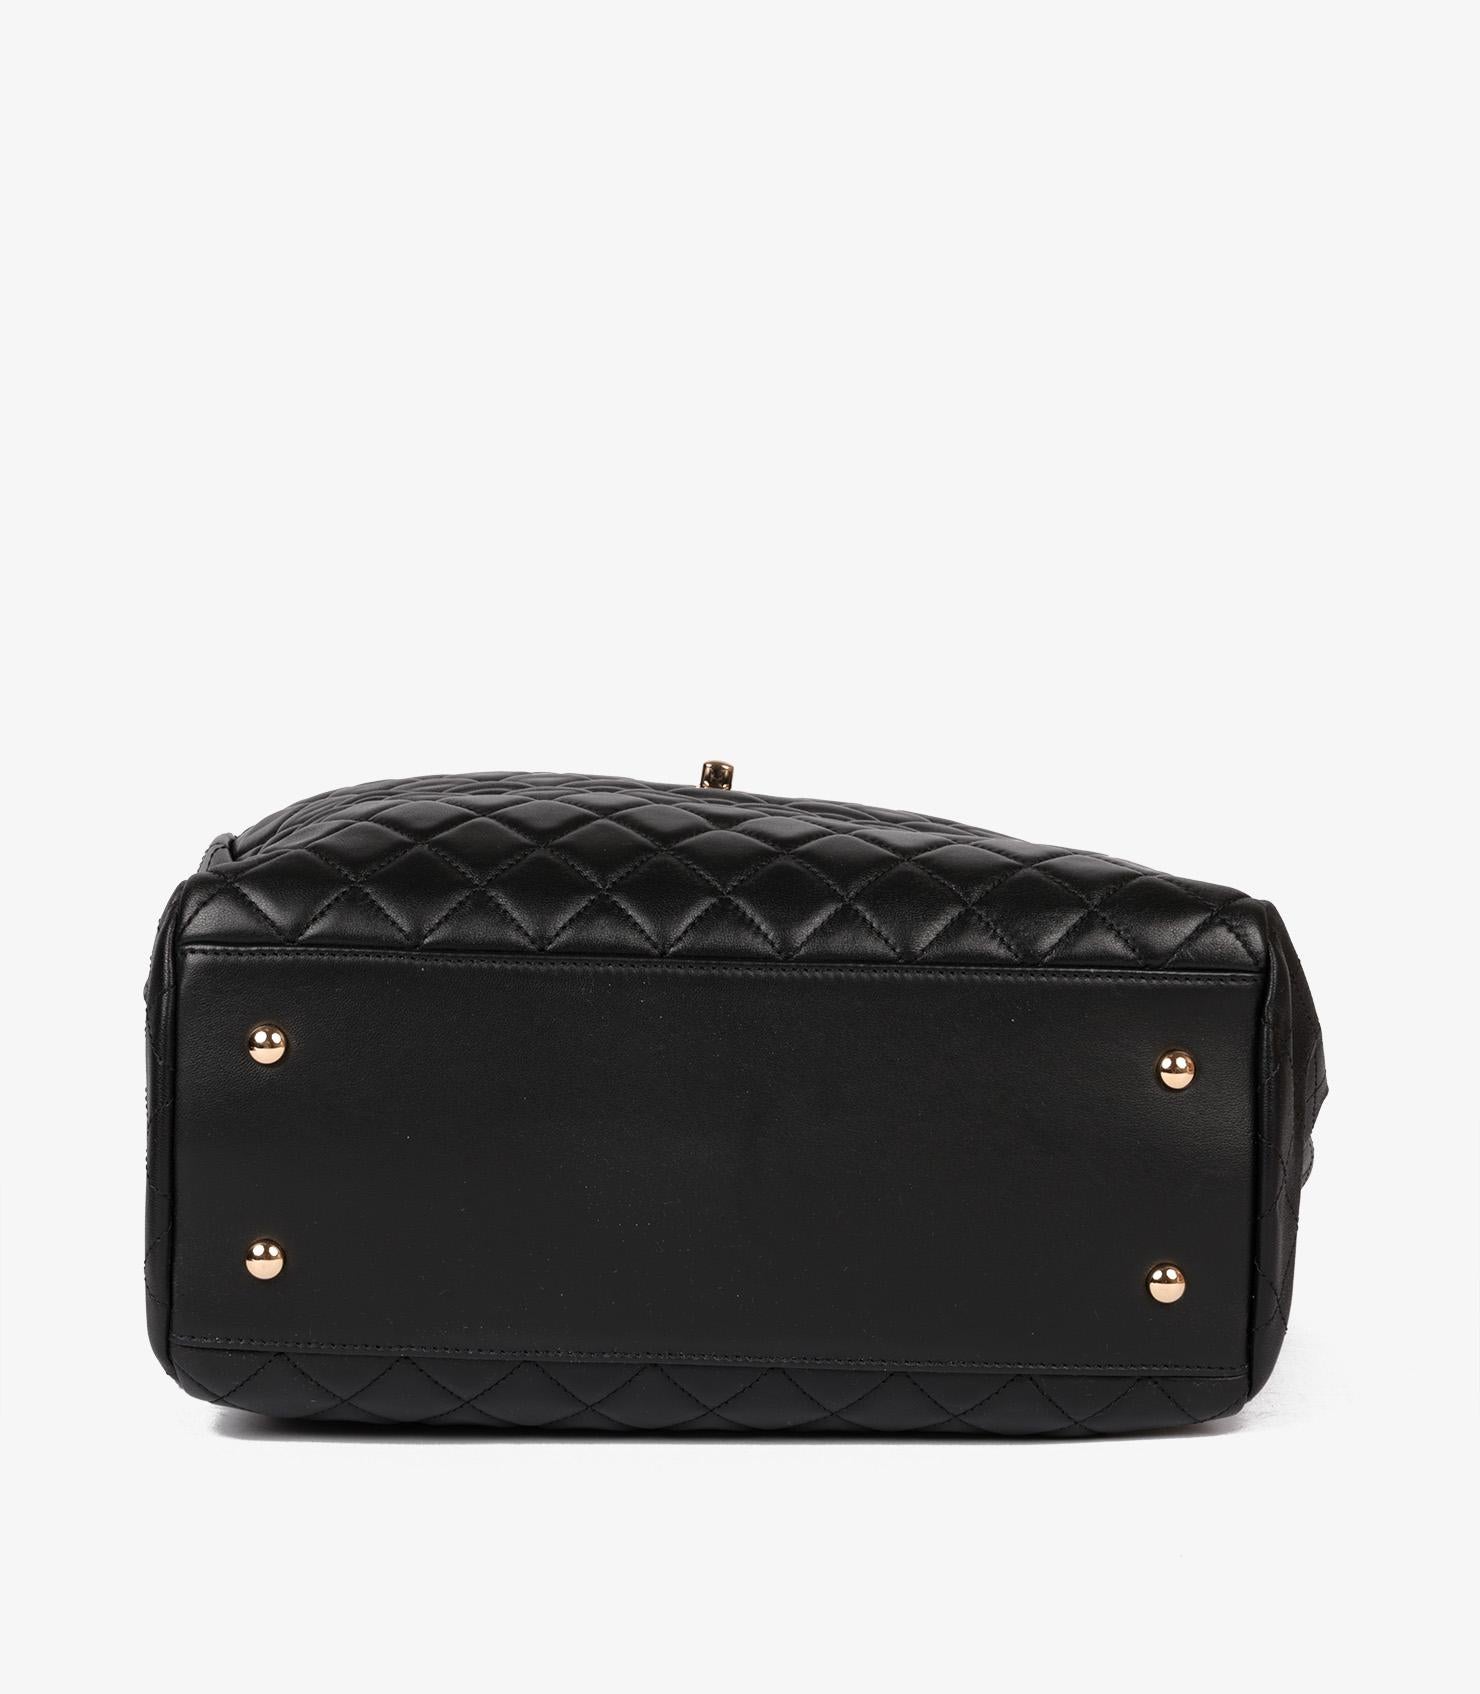 Chanel Black Quilted Lambskin Large Classic Bucket Bag For Sale 2